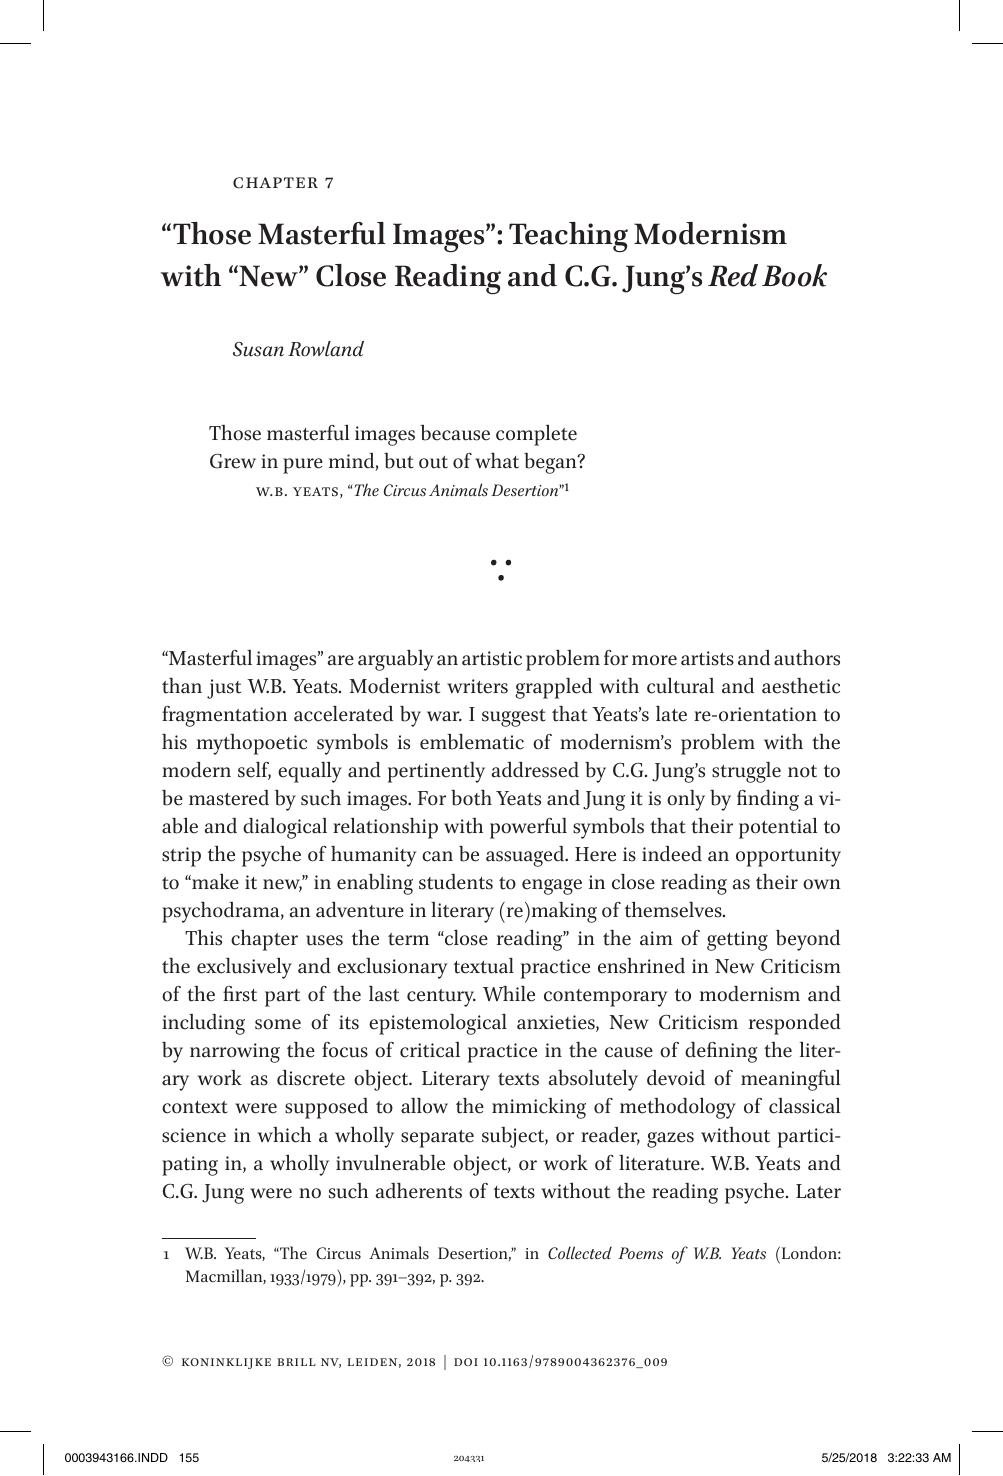 “Those Masterful Images”: Teaching Modernism  with “New” Close Reading and C.G. Jung’s Red Book (Chapter 7)